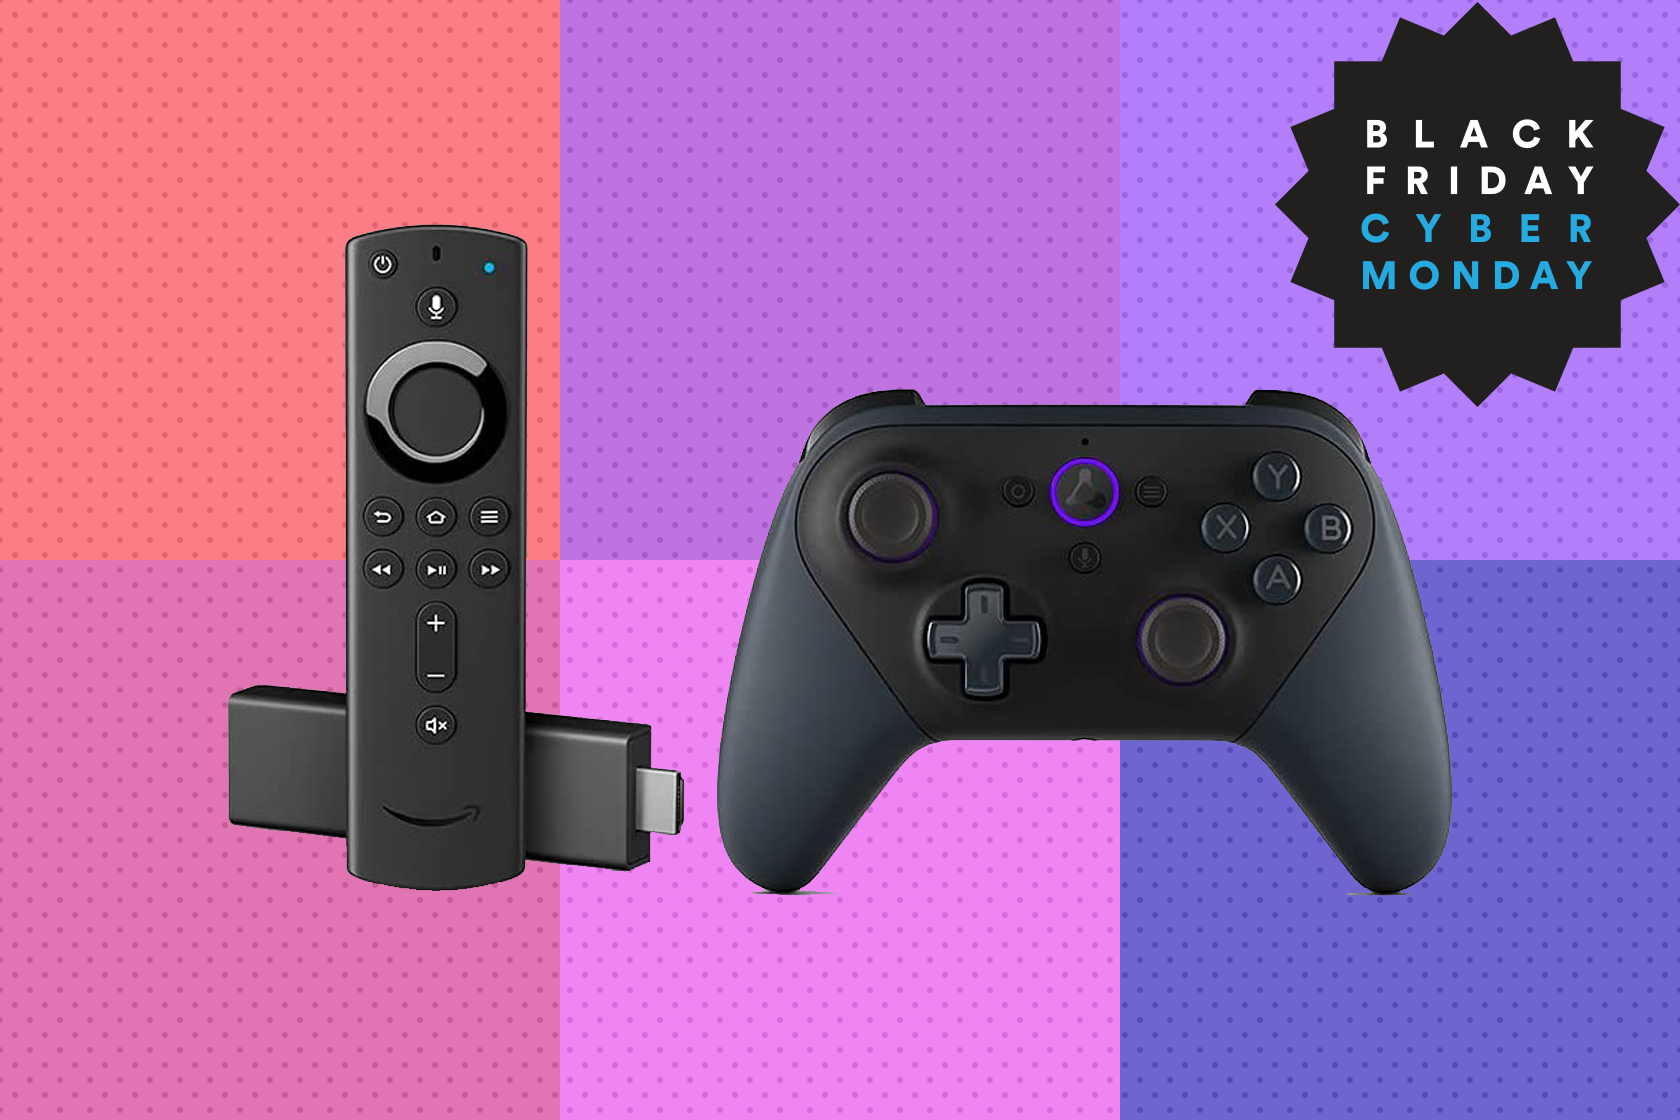 Black Friday gaming deal: Get a Fire TV Stick and Luna controller